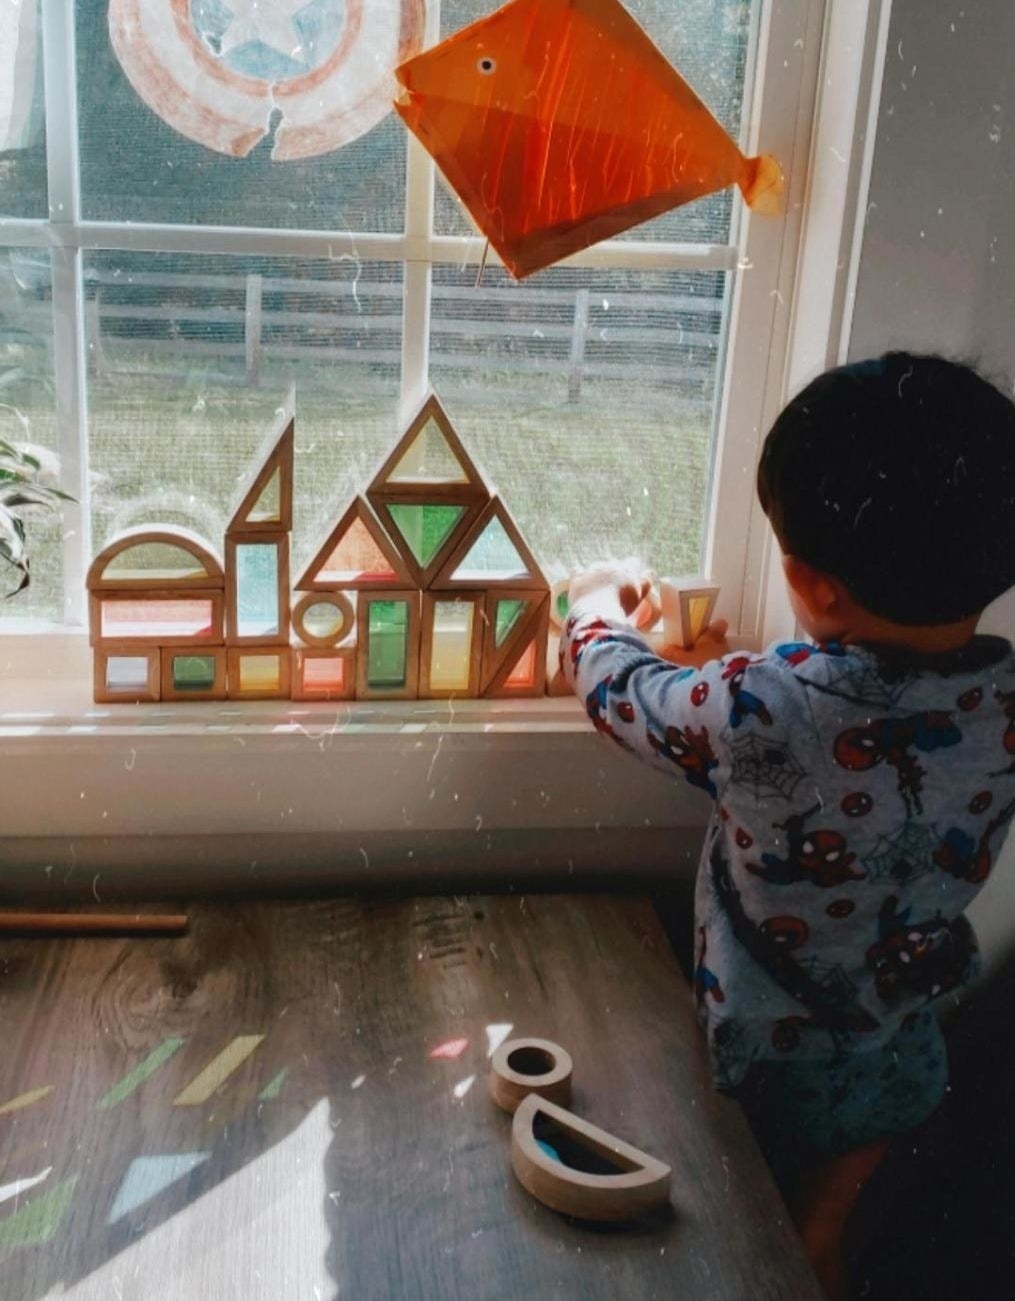 Reviewer&#x27;s photo of the blocks against a window as a child plays with them